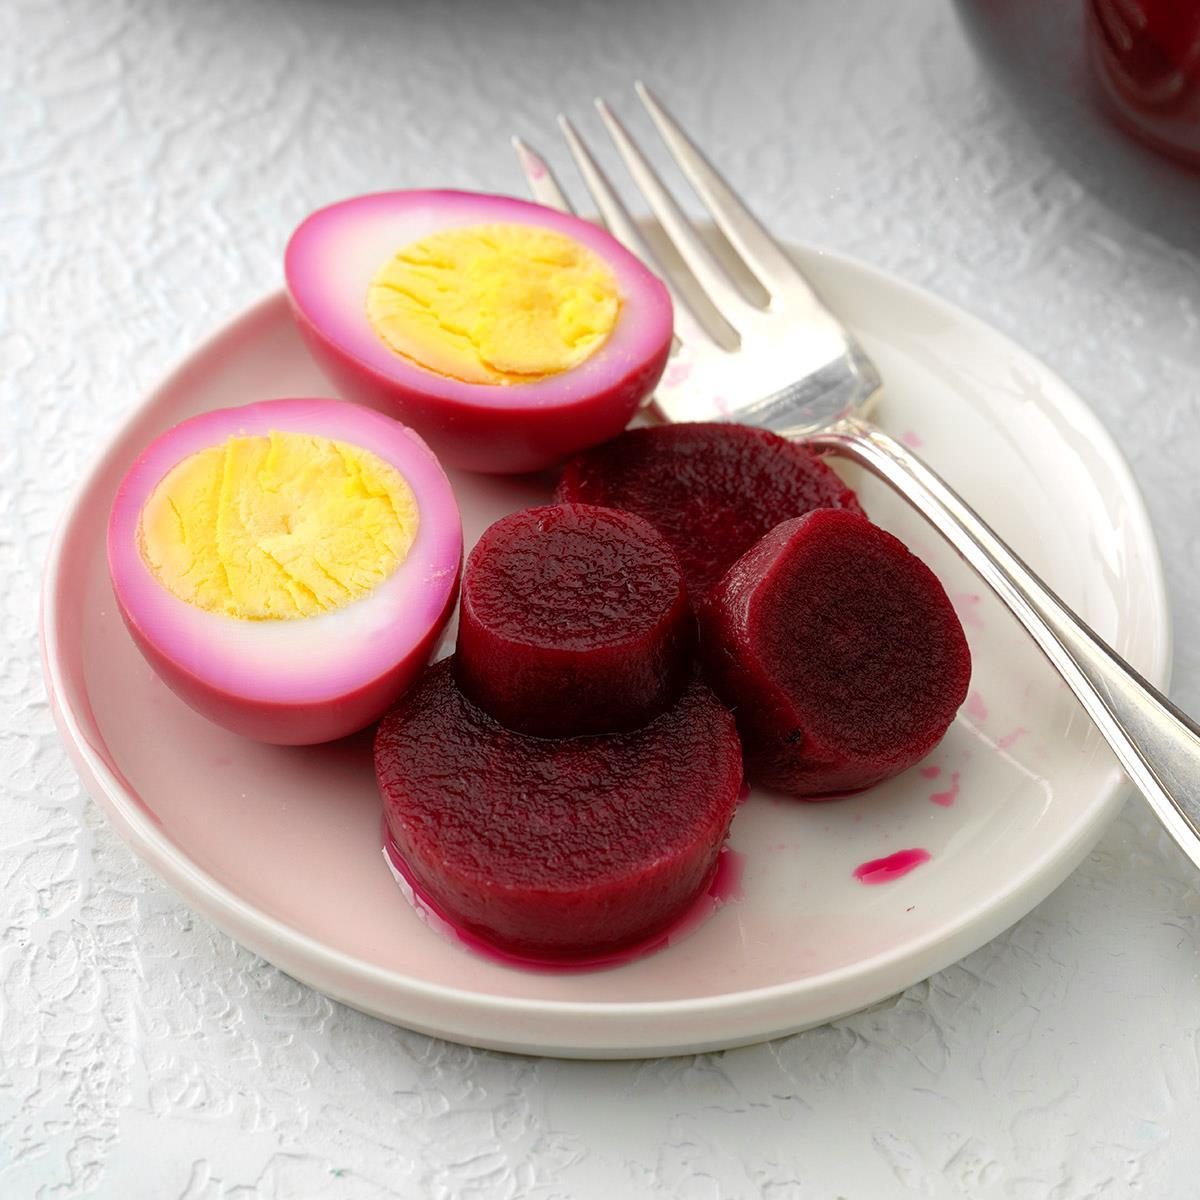 Pickled-Eggs-with-Beets_EXPS_DAI19_43846_B02_13_1b.jpg